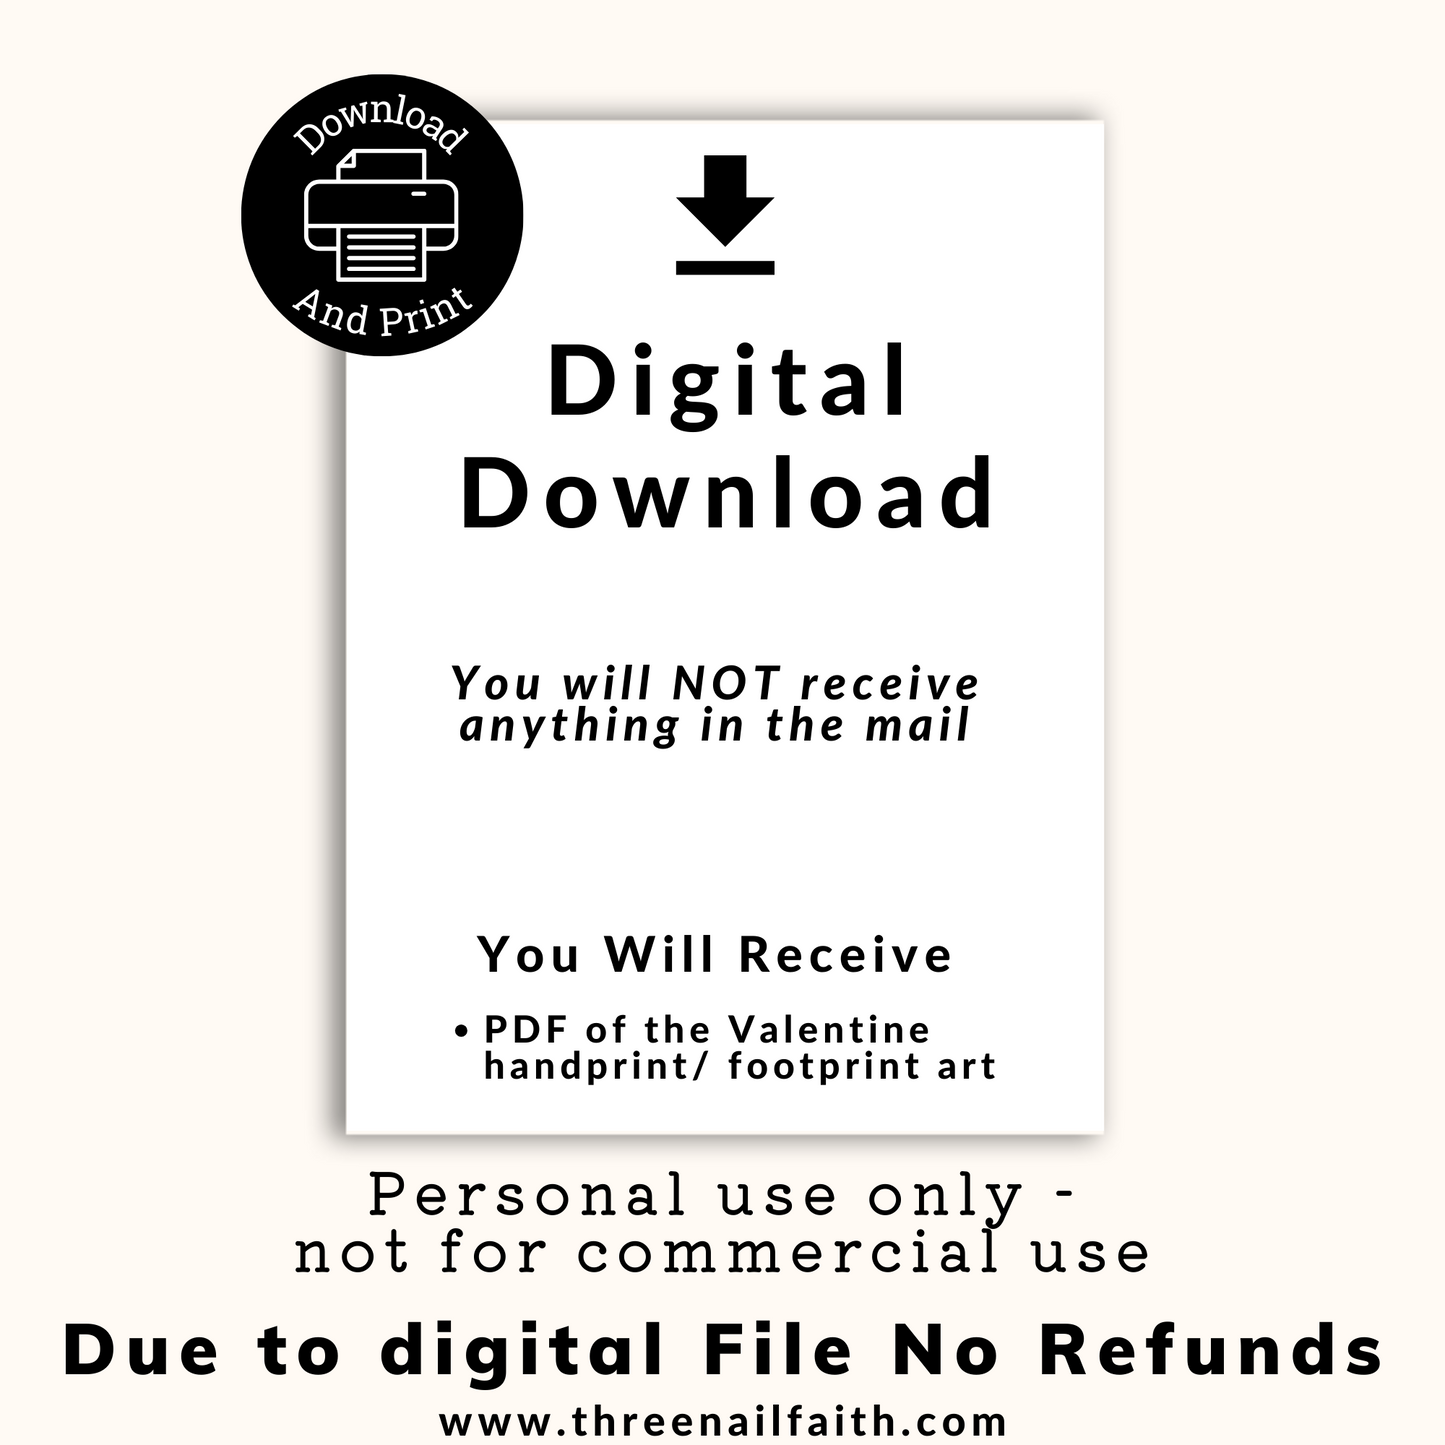 This is a digital download you will not receive anything in the mail.  This file is for personal use only.  You will receive one PDF download with your handprint art